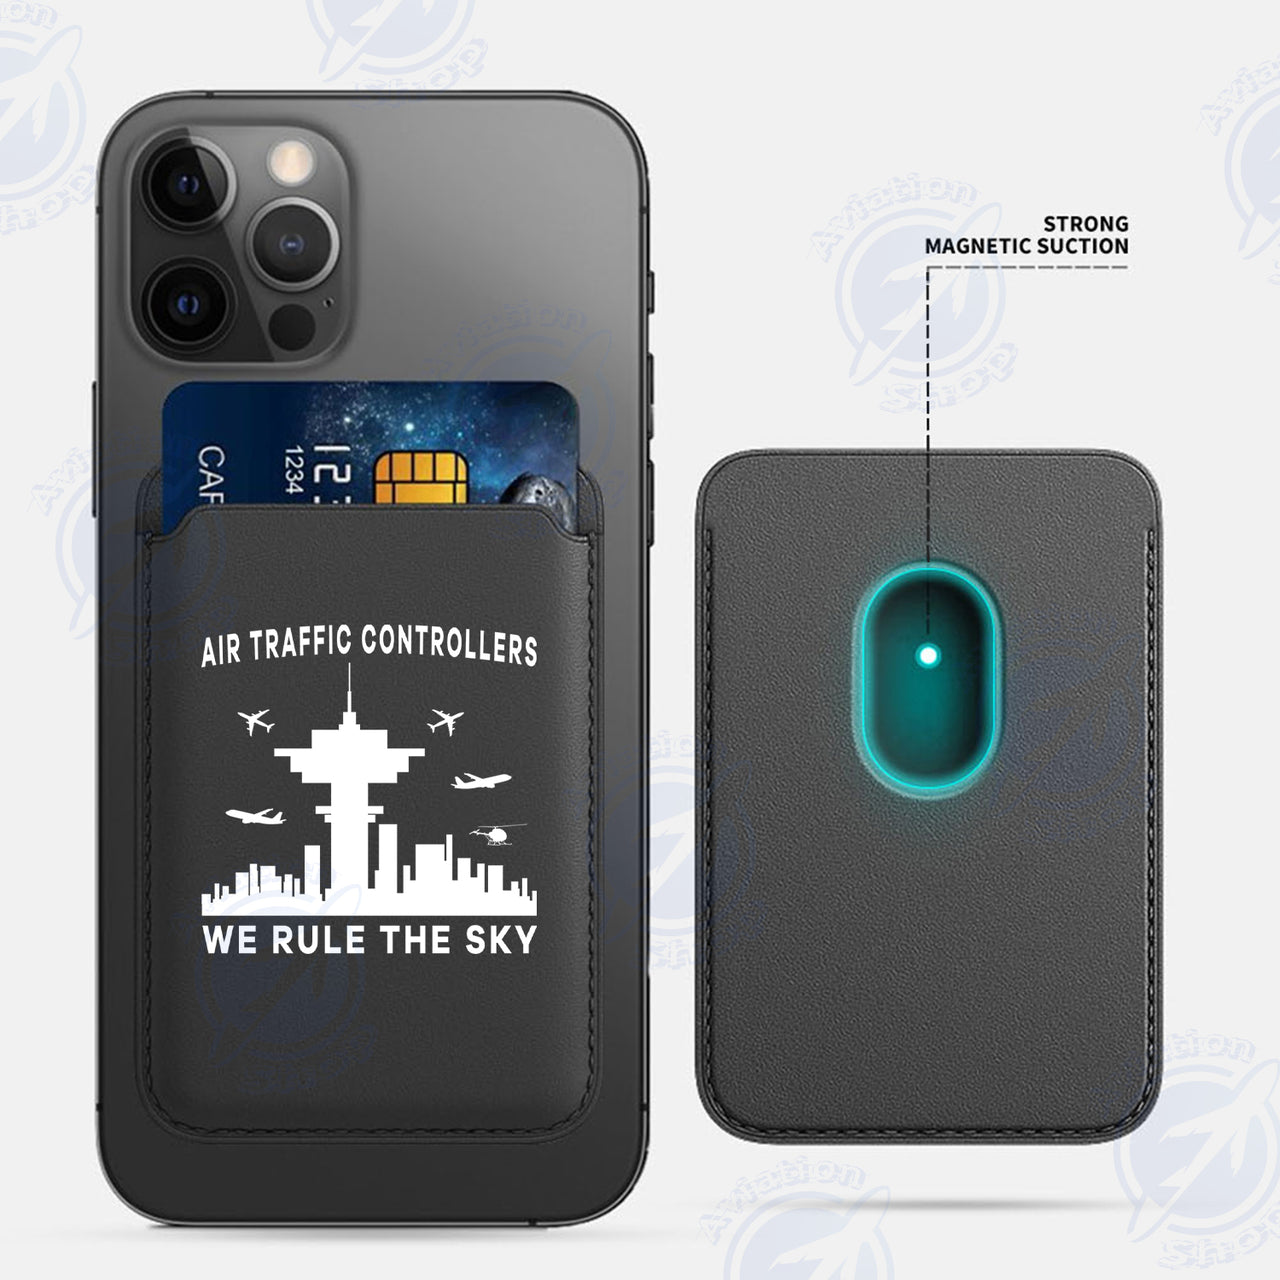 Air Traffic Controllers - We Rule The Sky iPhone Cases Magnetic Card Wallet